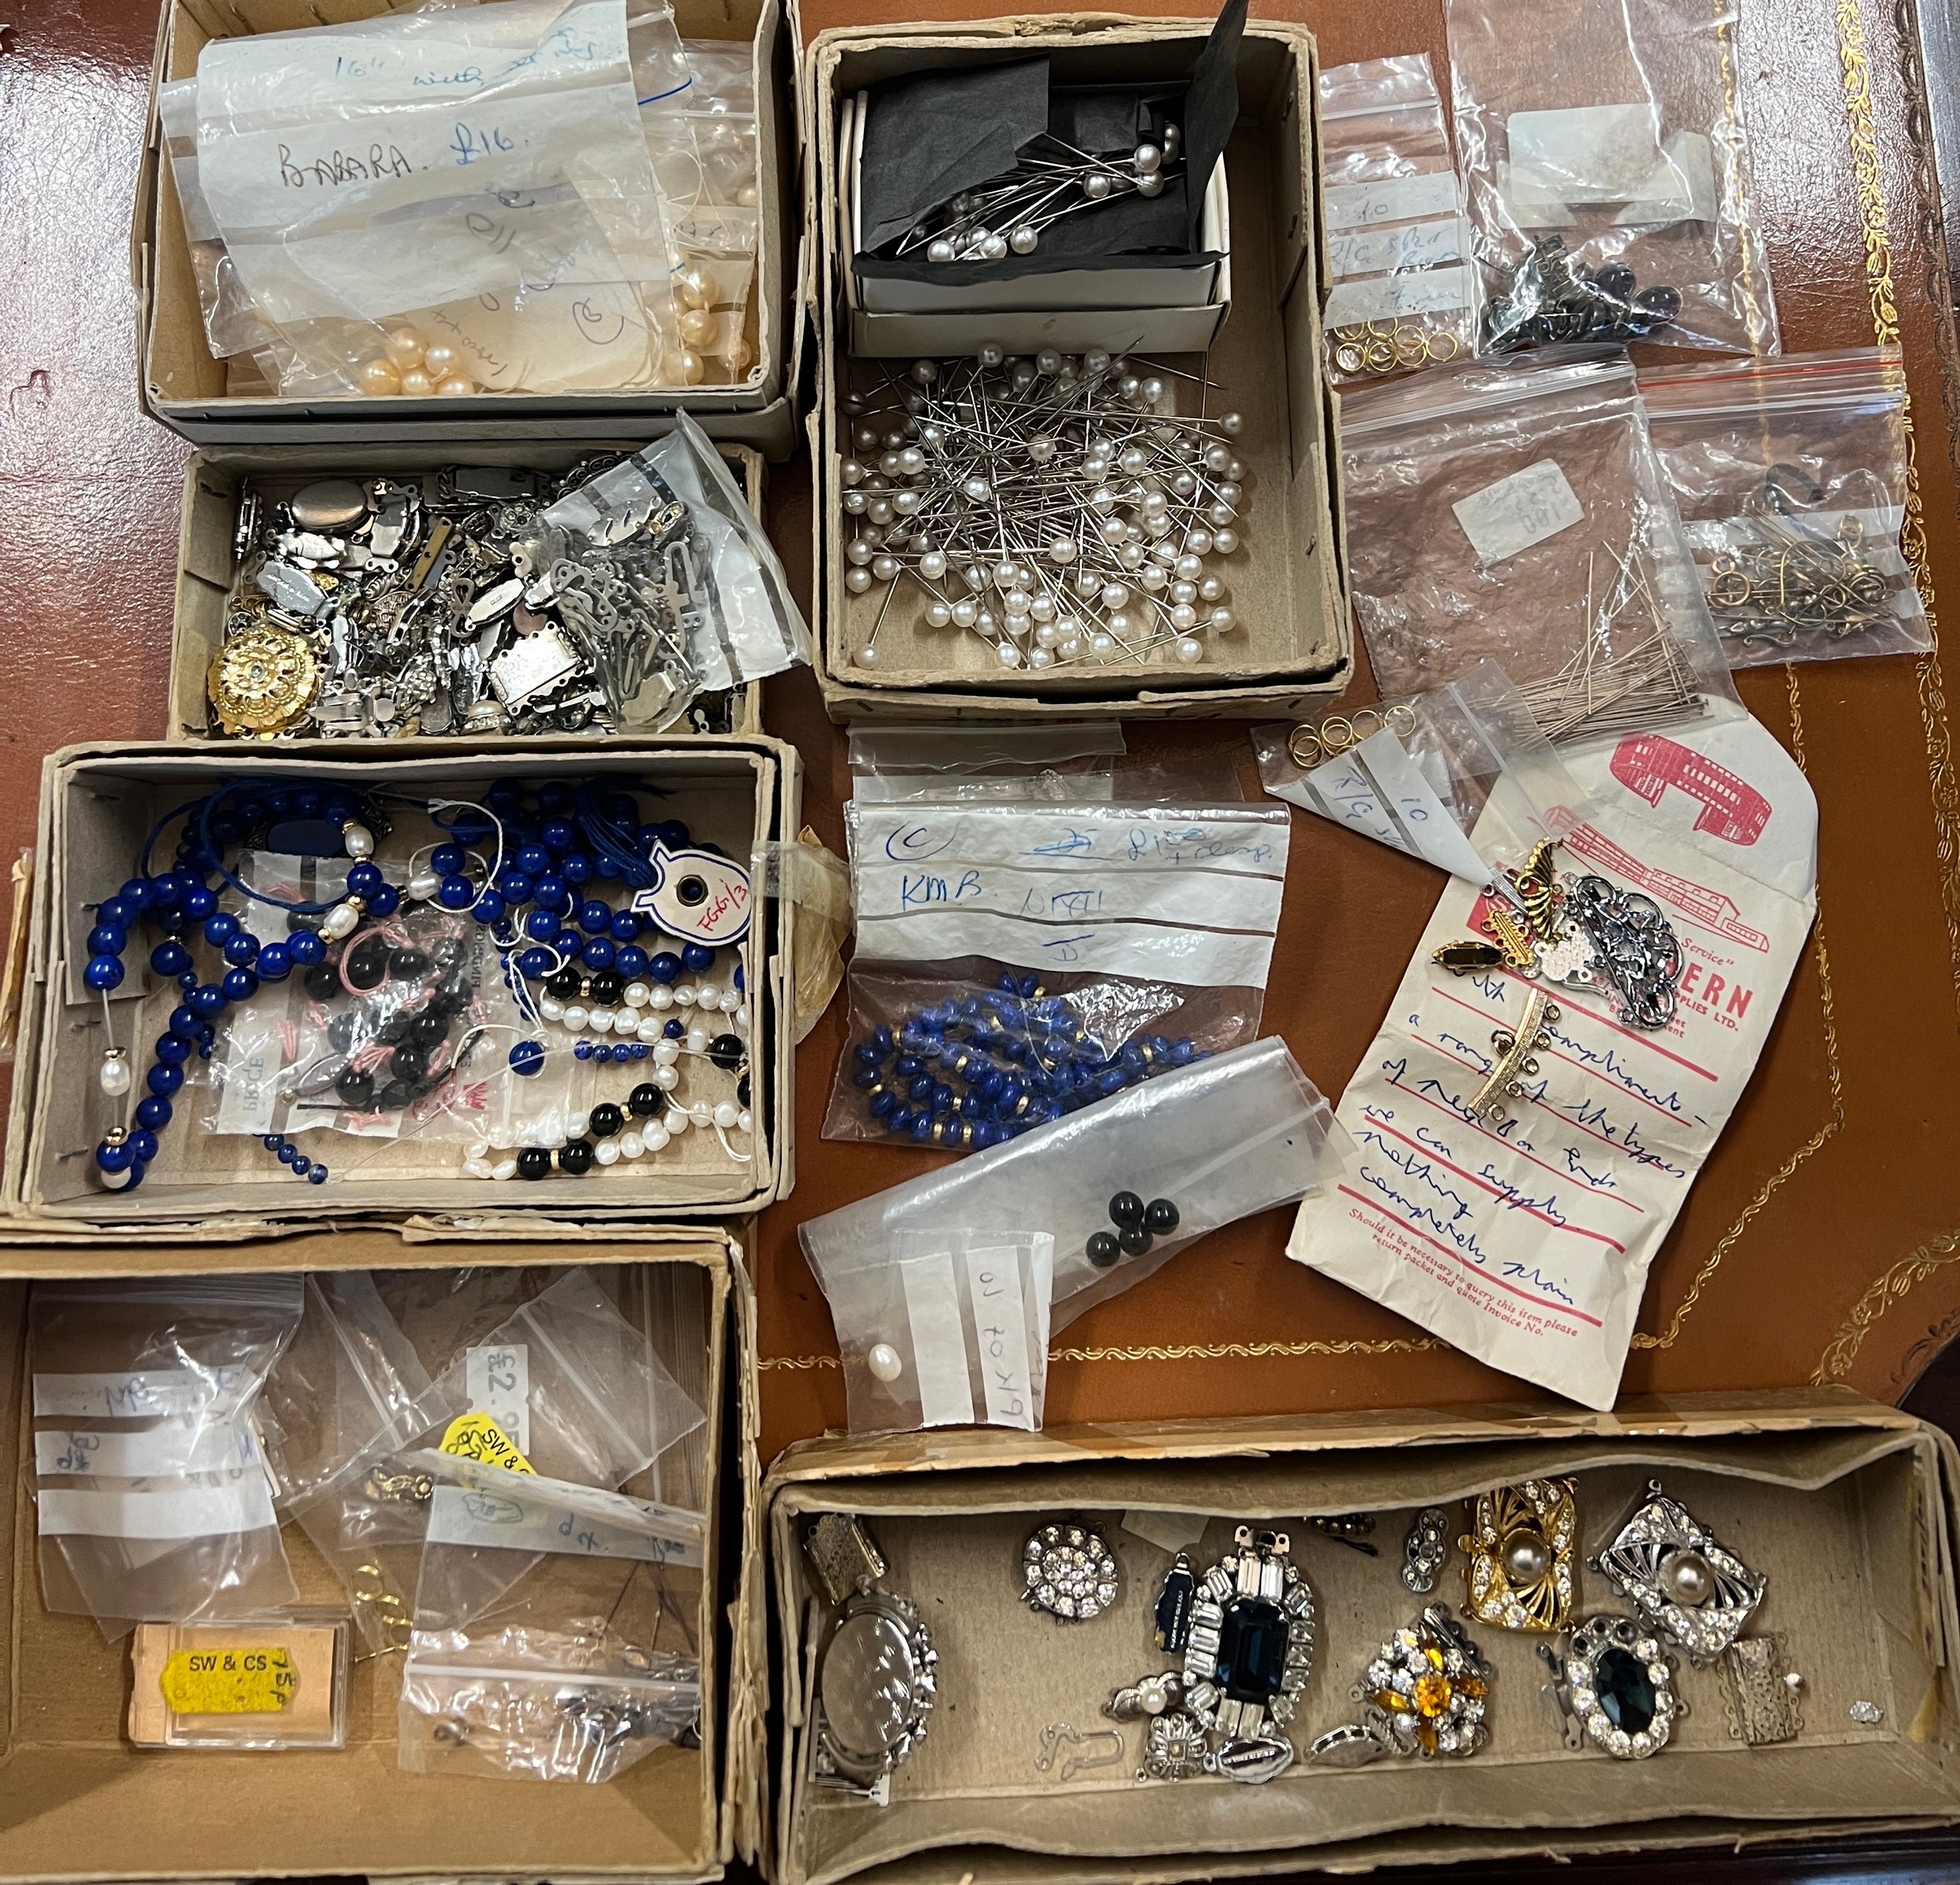 A quantity of jewellery fastenings, loose beads including lapis etc.